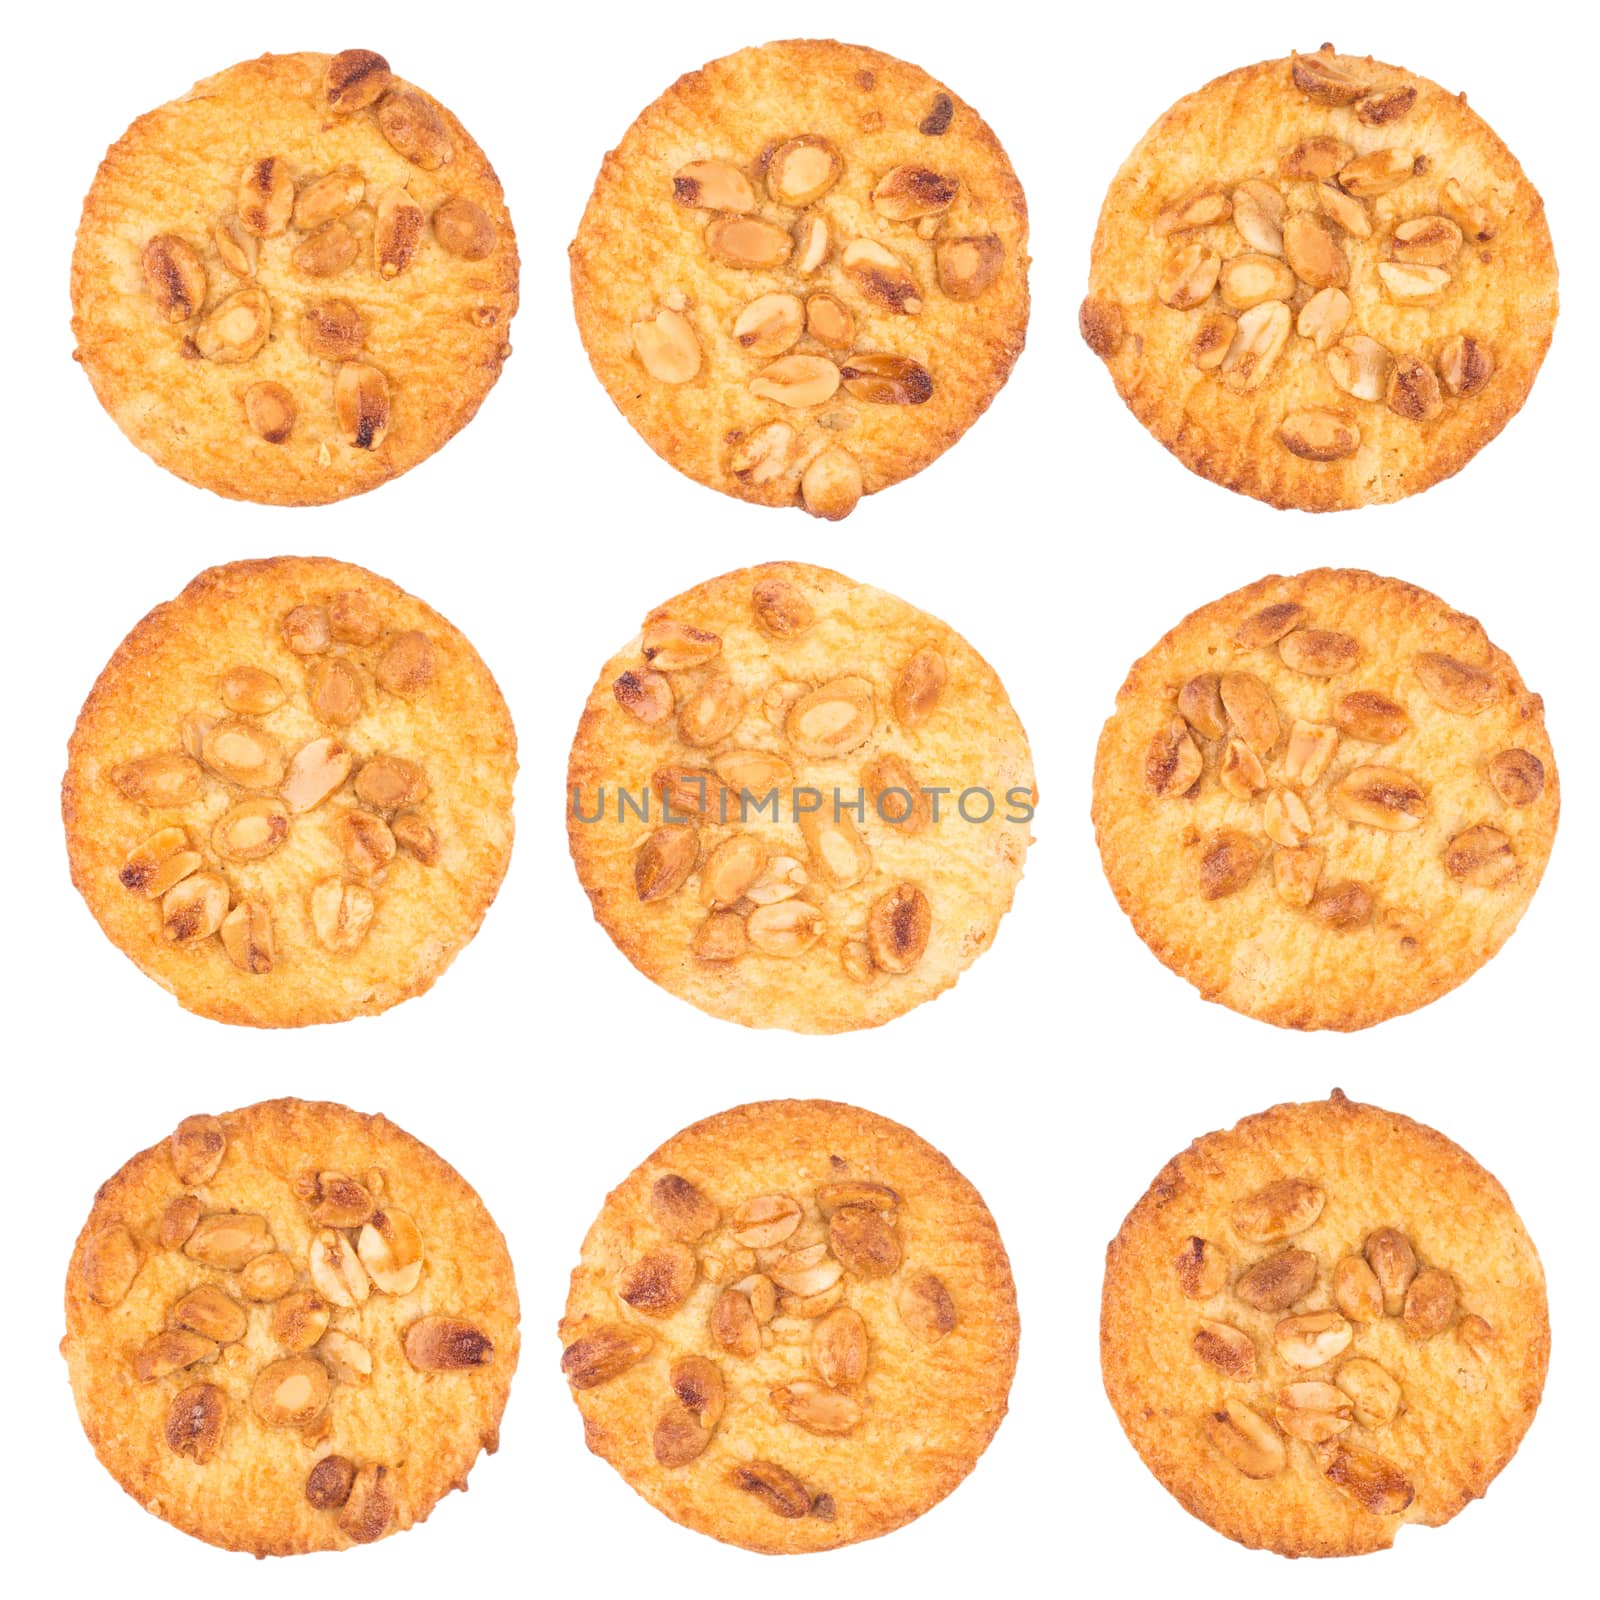 Peanut Butter Cookie isolated on a white background. Top view.